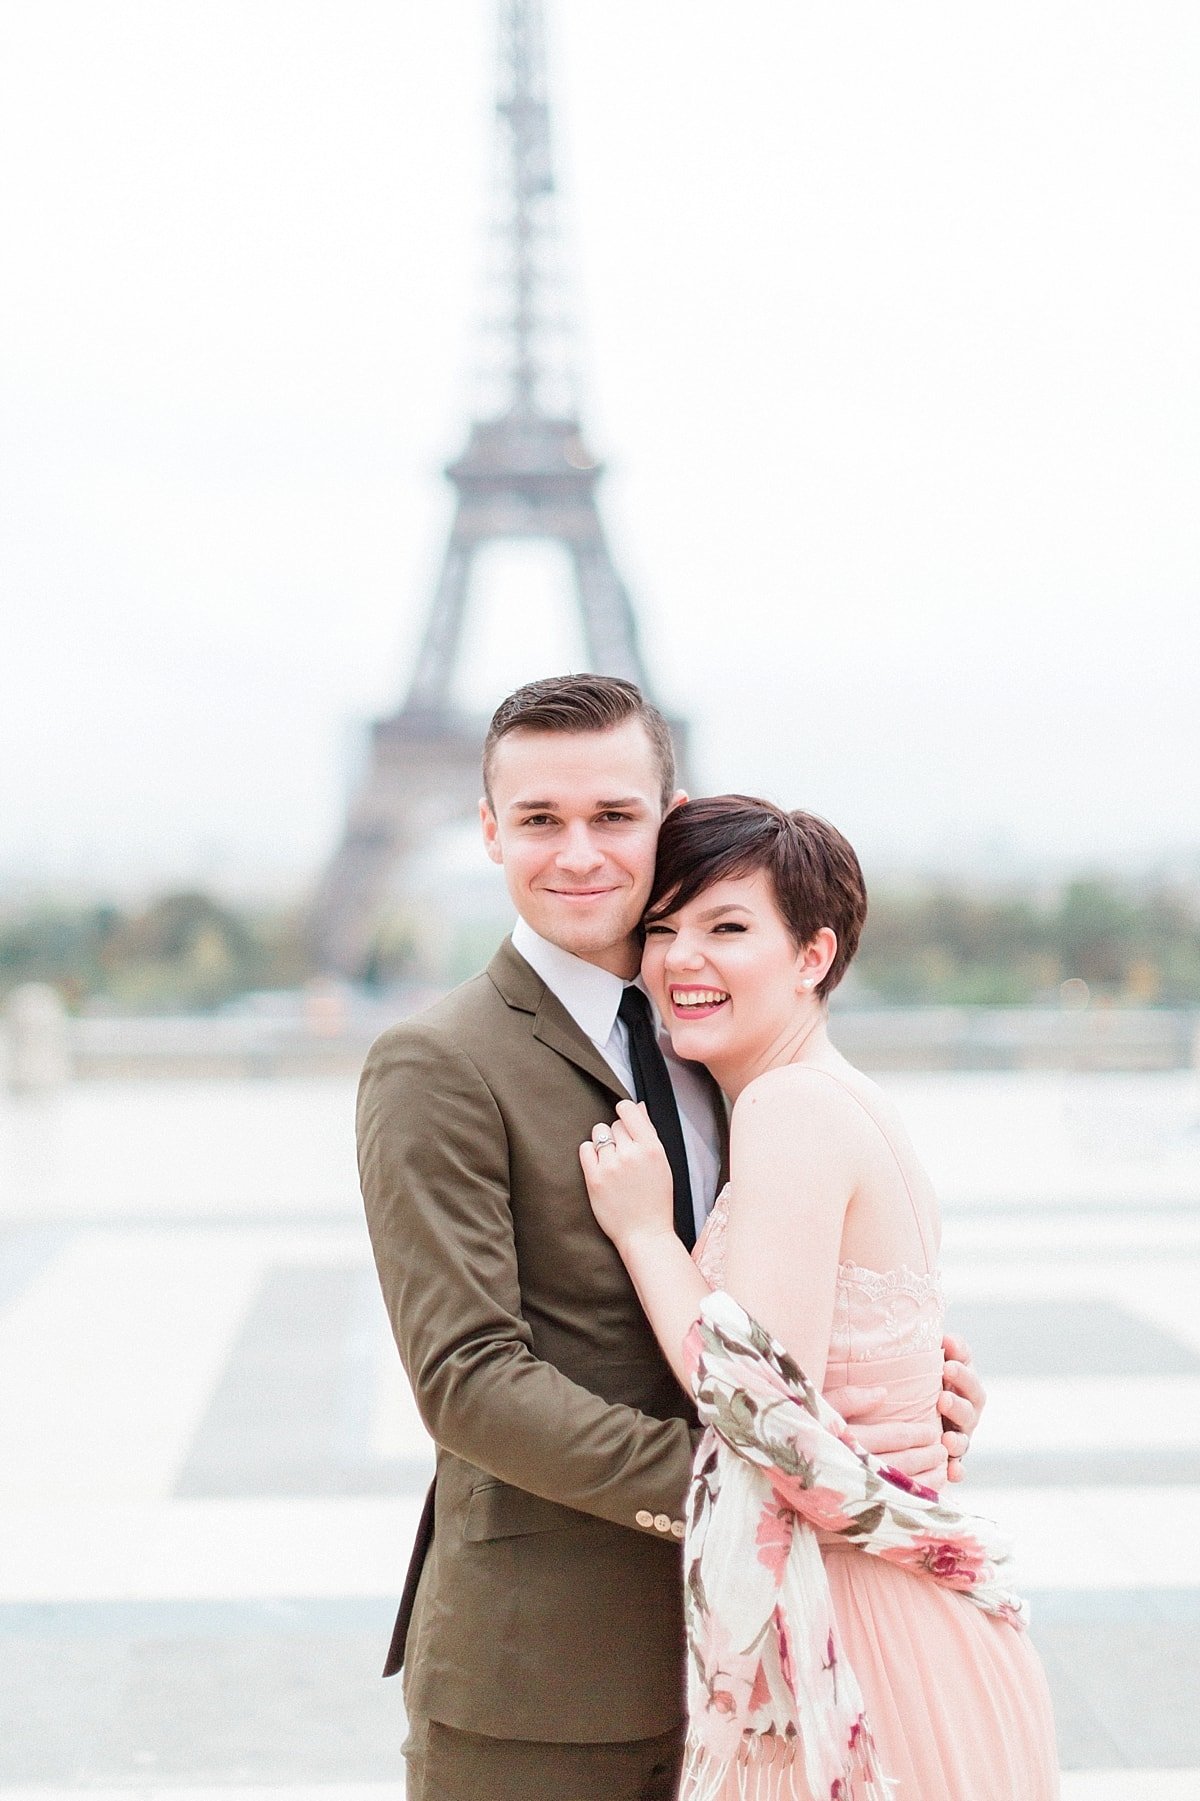 Fall Paris anniversary session at the Eiffel Tower photographed by Alicia Yarrish